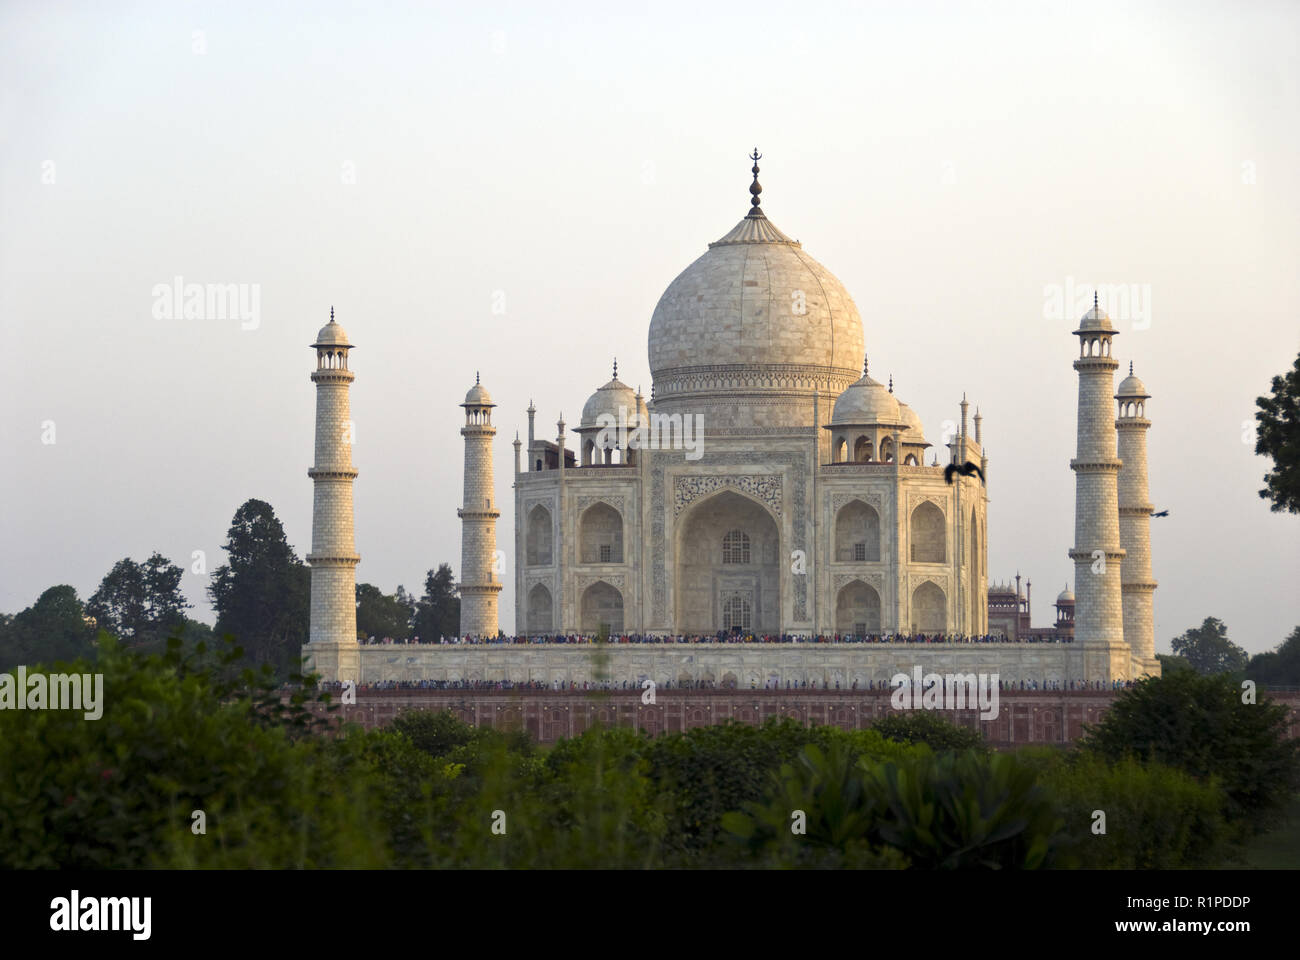 The Taj Mahal mausoleum, seen from the Mehtab Bagh, a riverside park and garden in Agra, India. Stock Photo